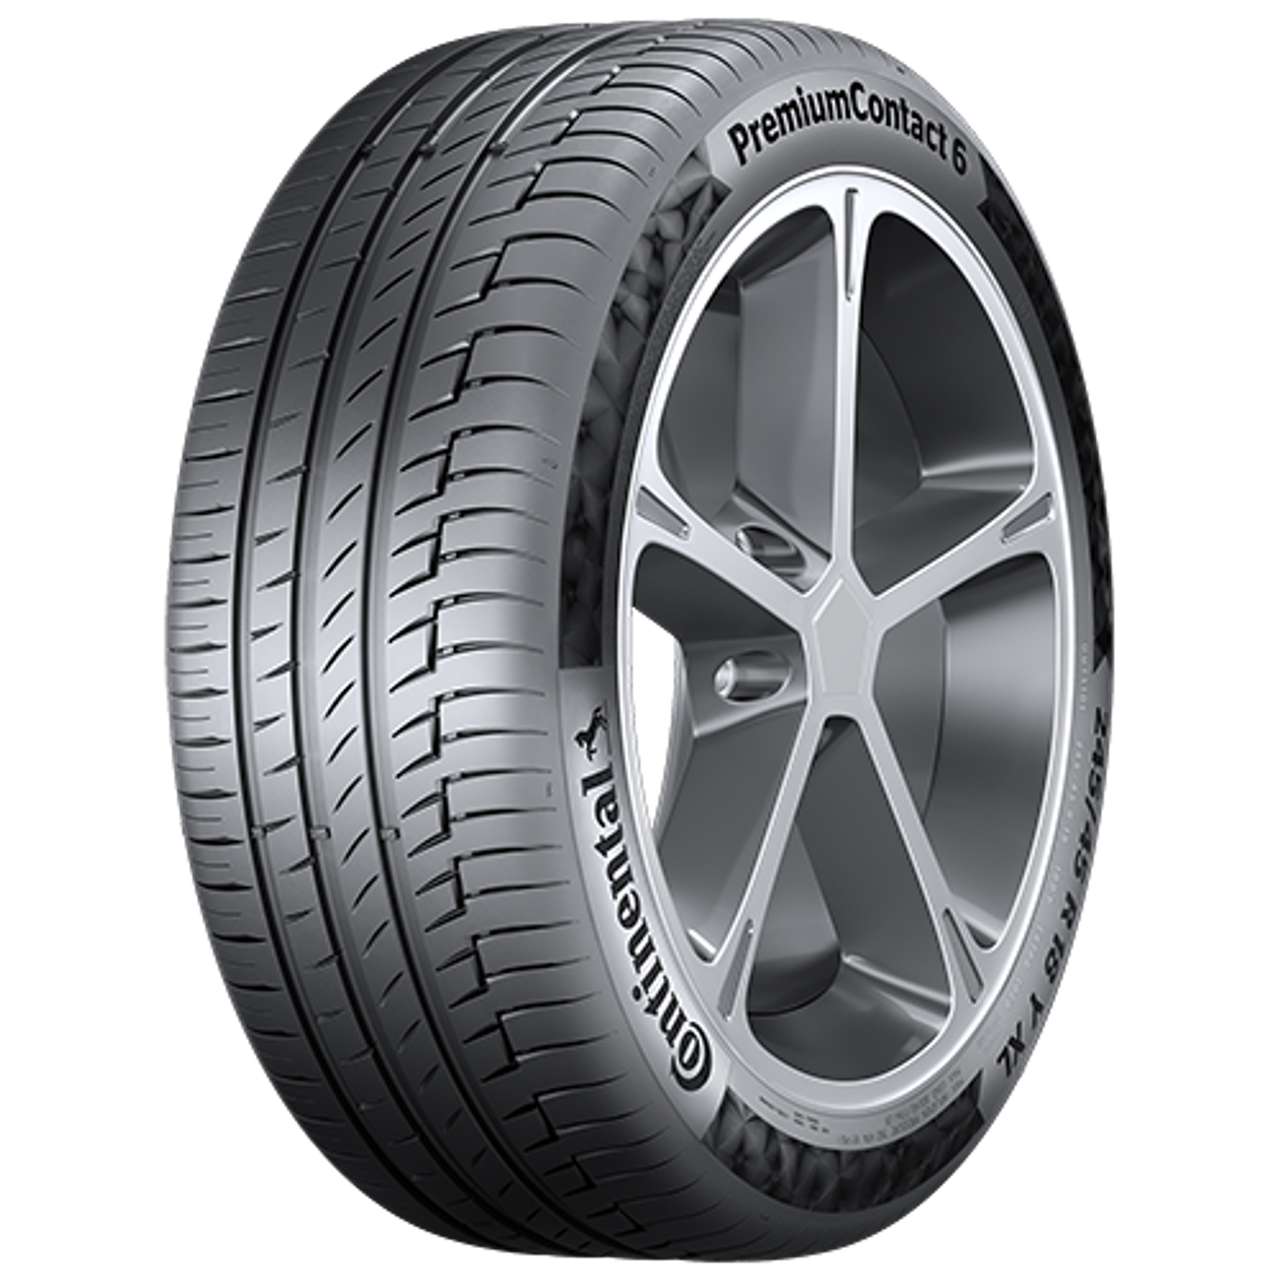 CONTINENTAL PREMIUMCONTACT 6 (AO) (EVc) 265/45R21 108H CONTISILENT FR BSW